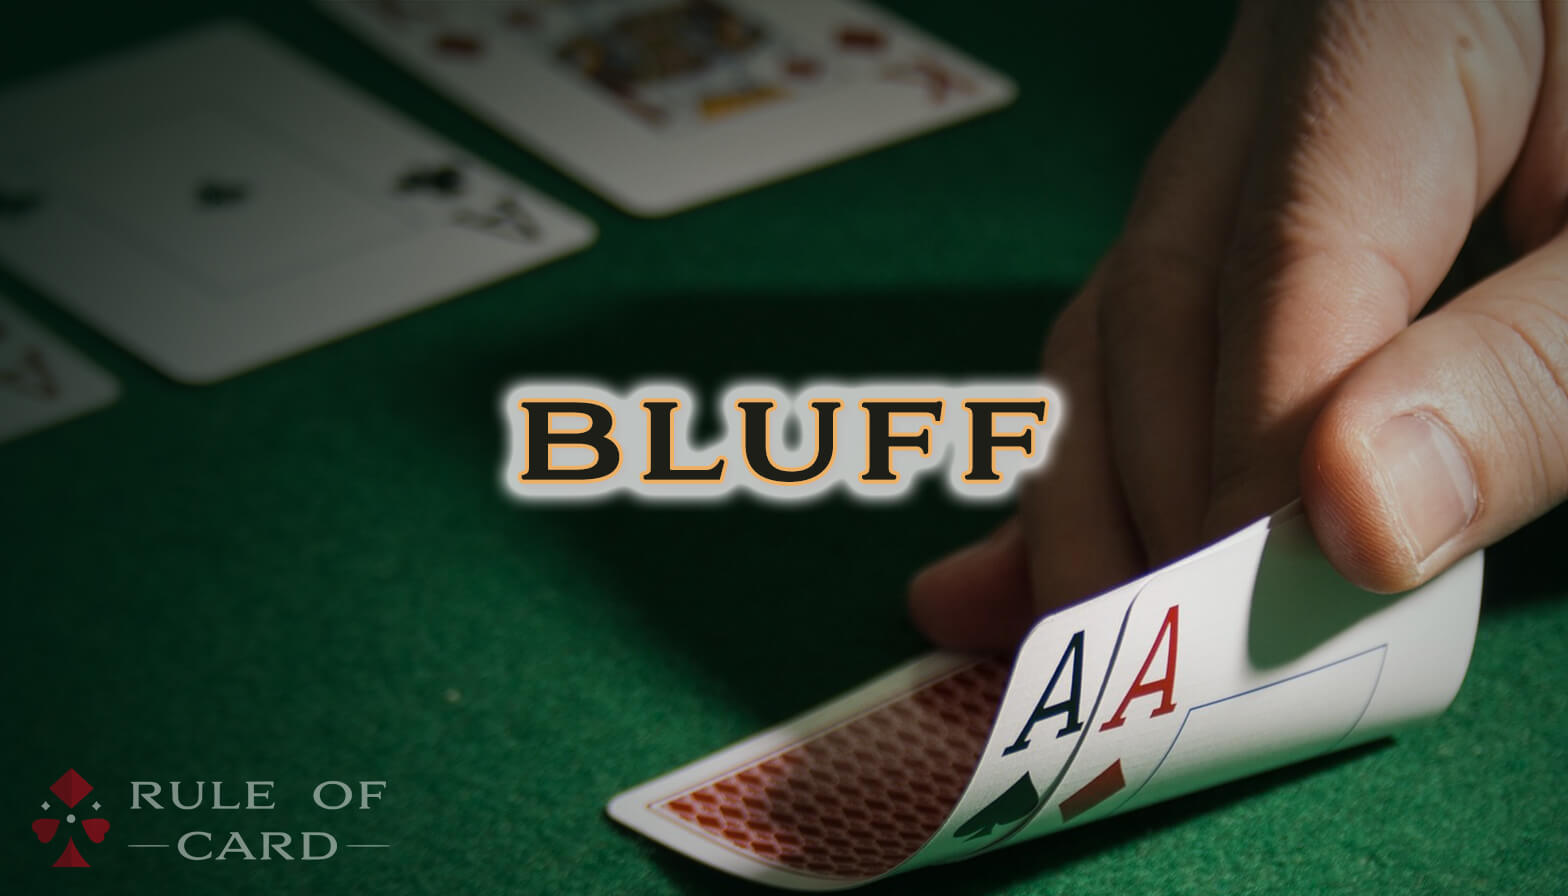 Playing the card game Bluff